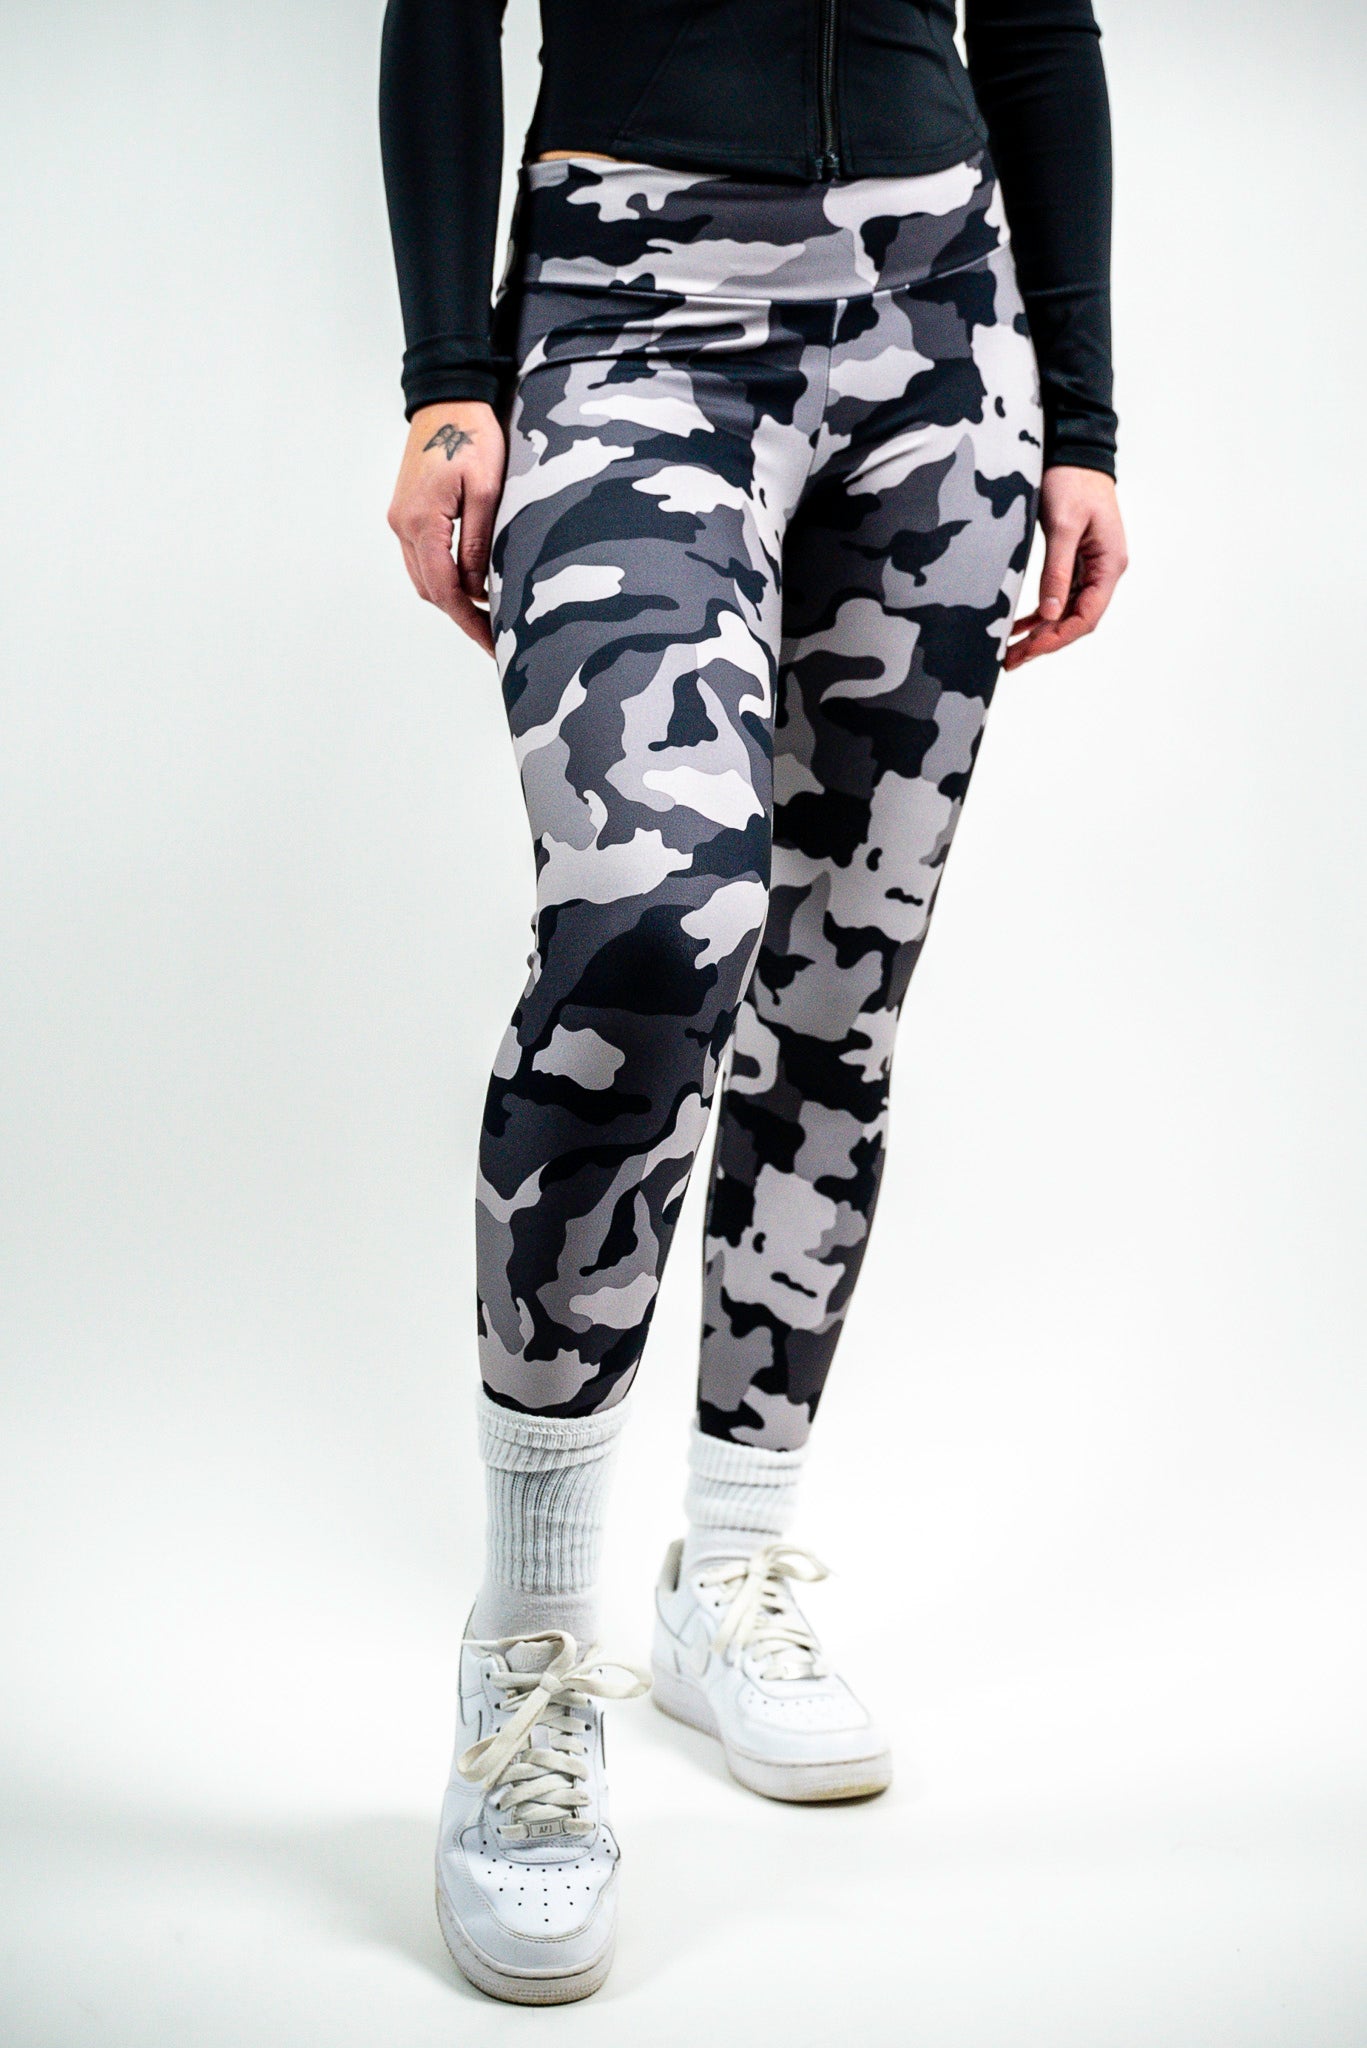 Zyia Active Performance Gray Camo Seamless High Waist Leggings Women's  Large - $40 - From Sara